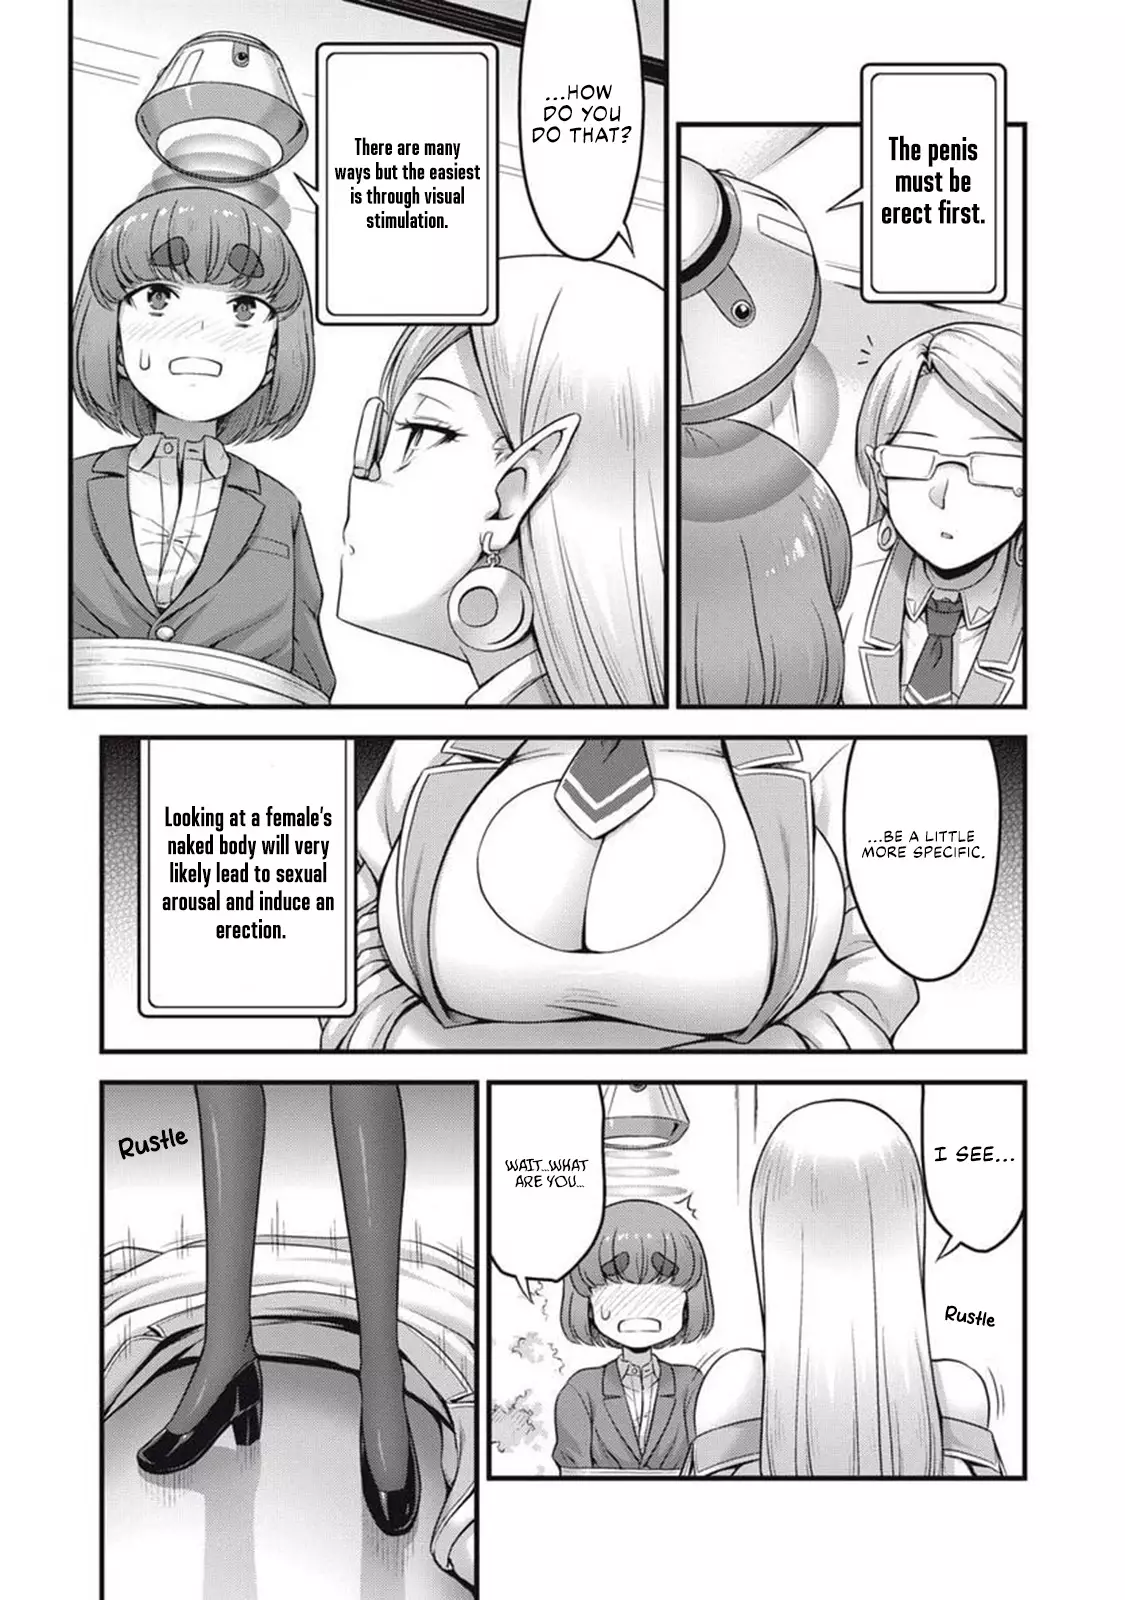 Queen's Seed - 4 page 8-b3ad7819